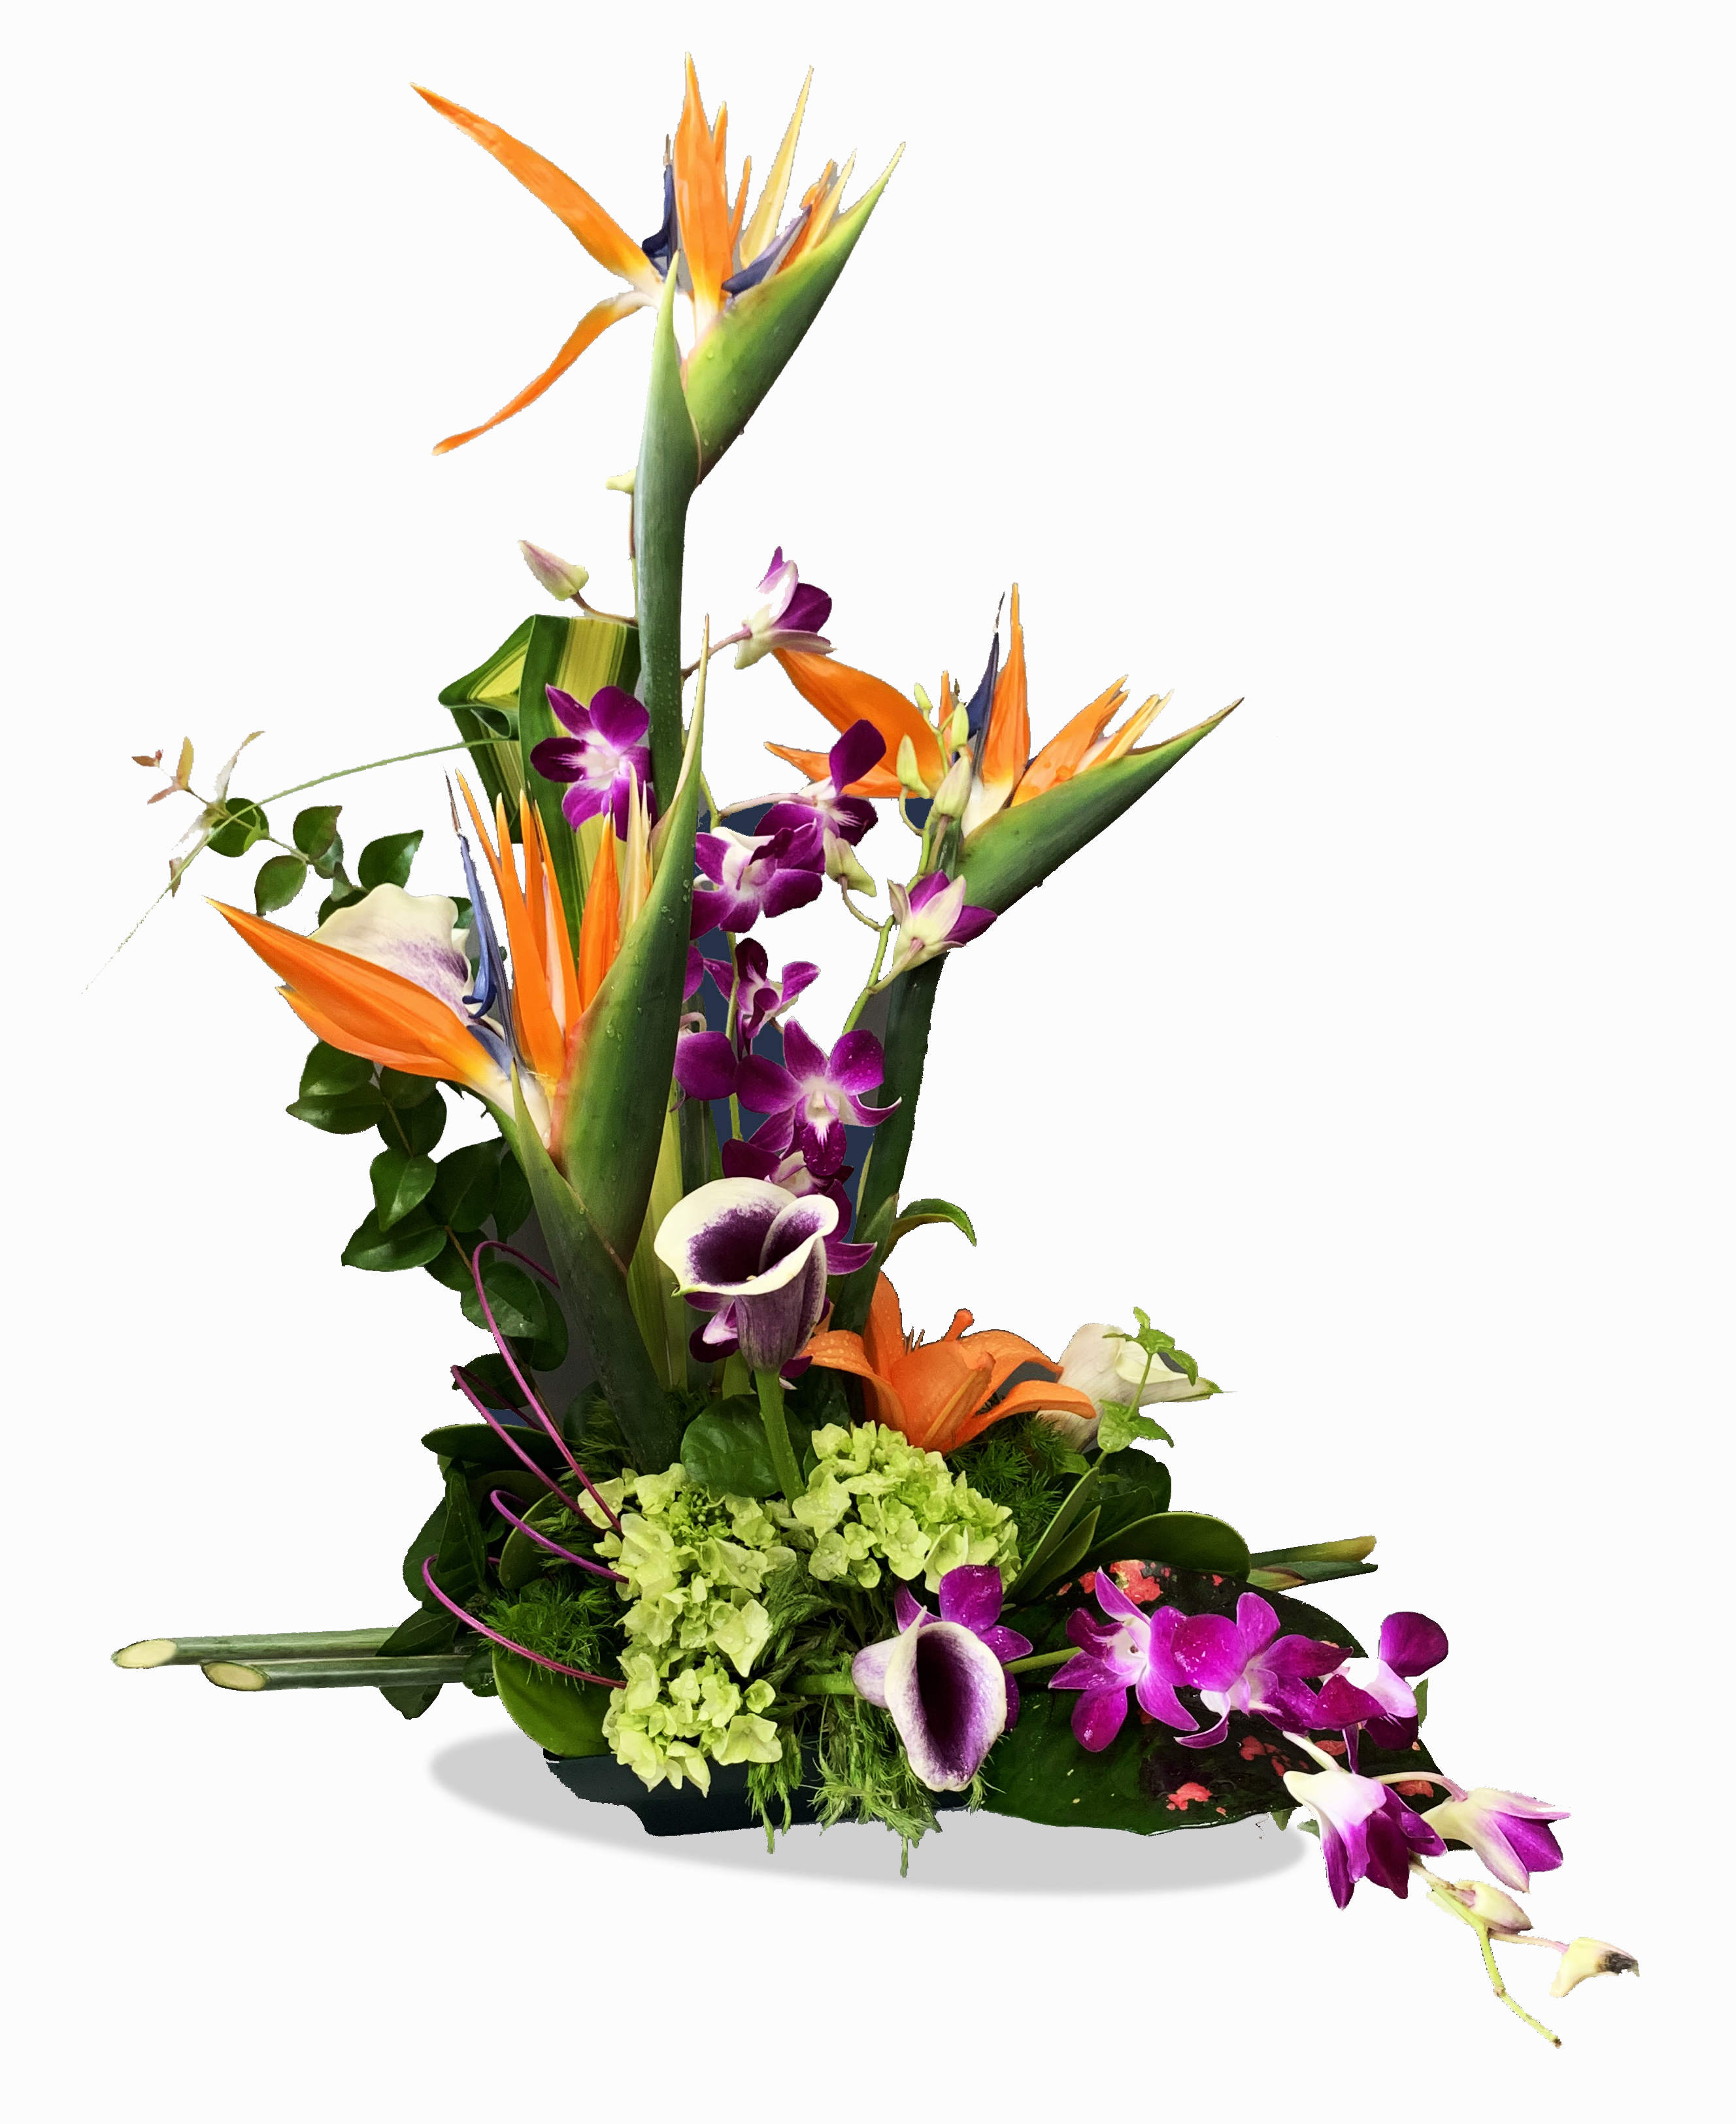 Monthly Flower Delivery Subscription